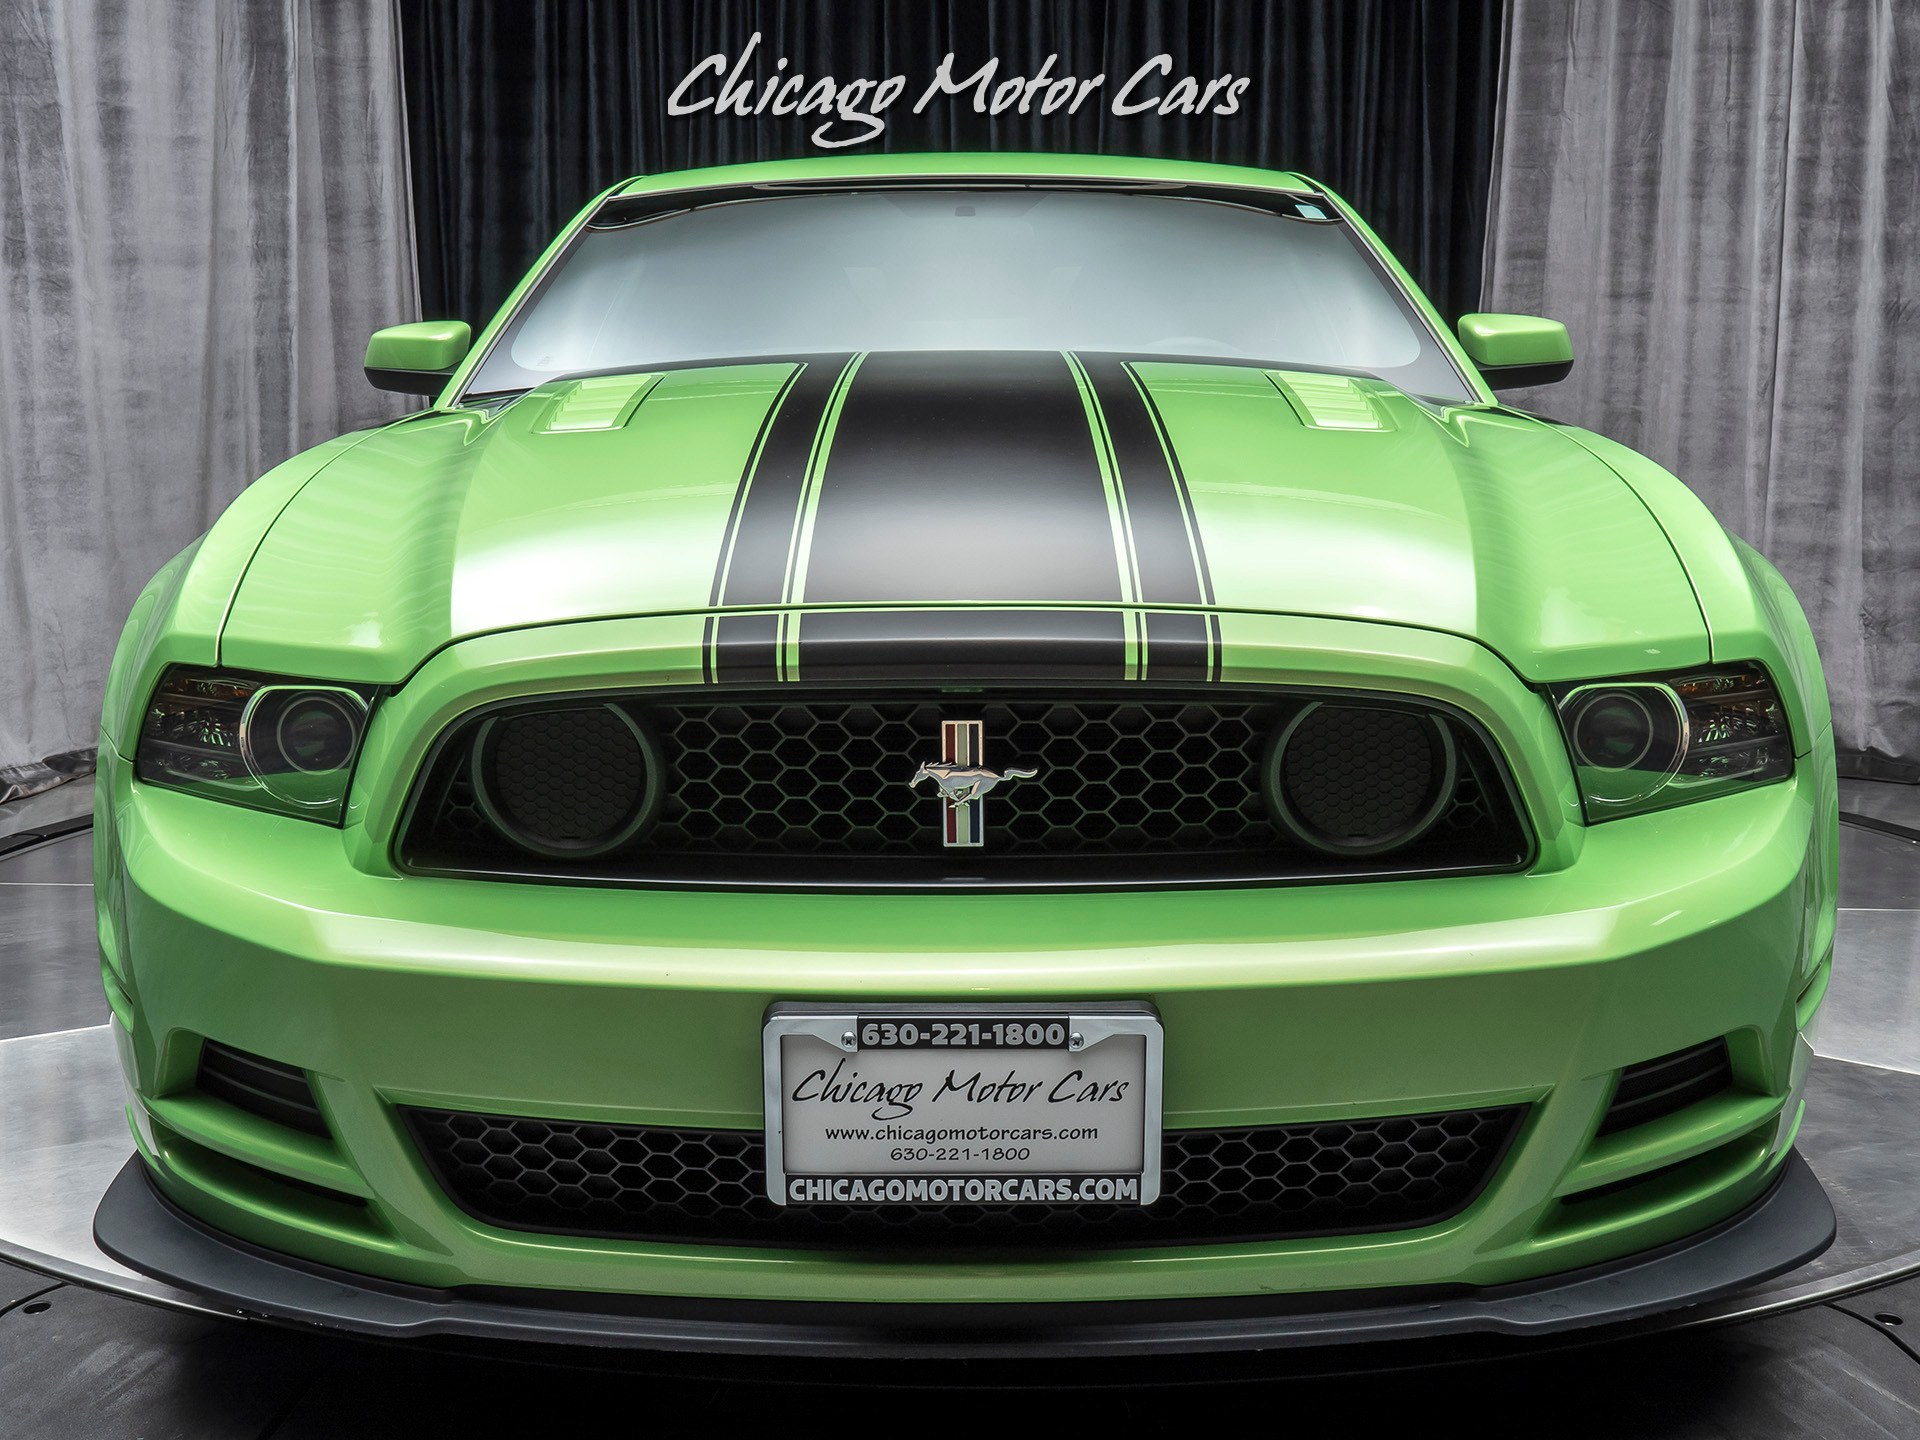 Used-2013-Ford-Mustang-Mustang-Boss-302-GOTTA-HAVE-IT-GREEN-METALLIC-TRI-COAT-RARE-EXAMPLE